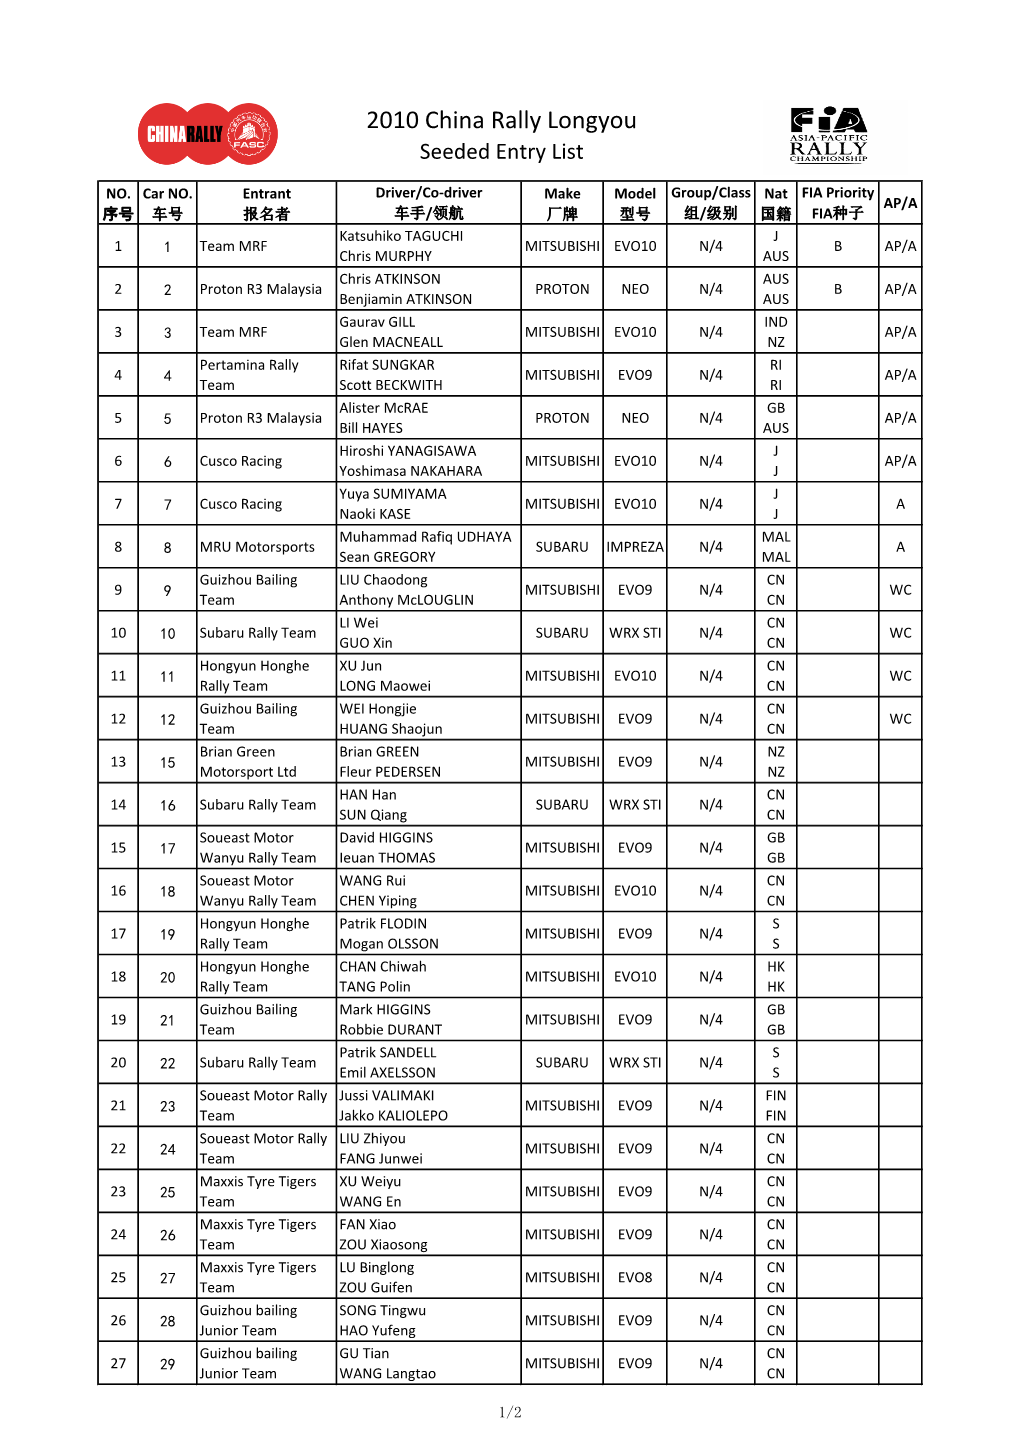 2010 China Rally Longyou Seeded Entry List